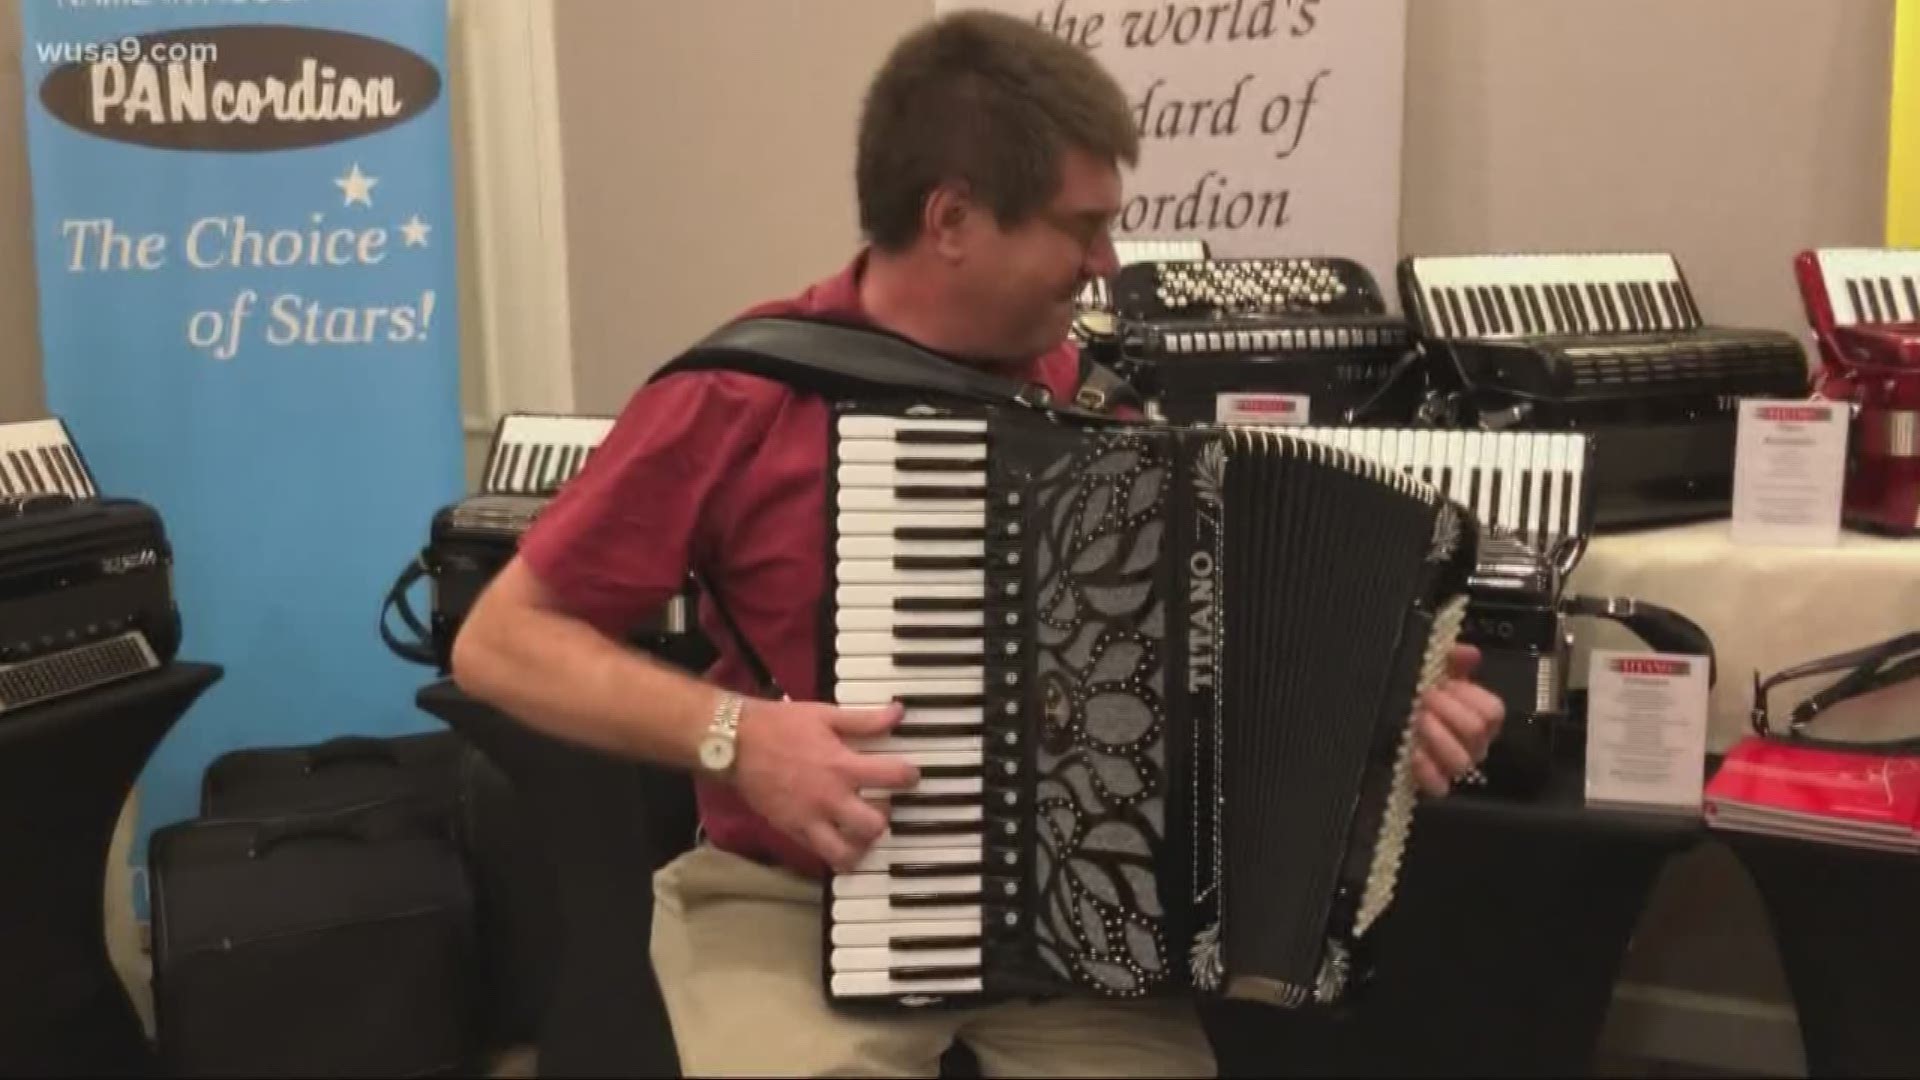 Here's what goes on inside an Accordion Festival